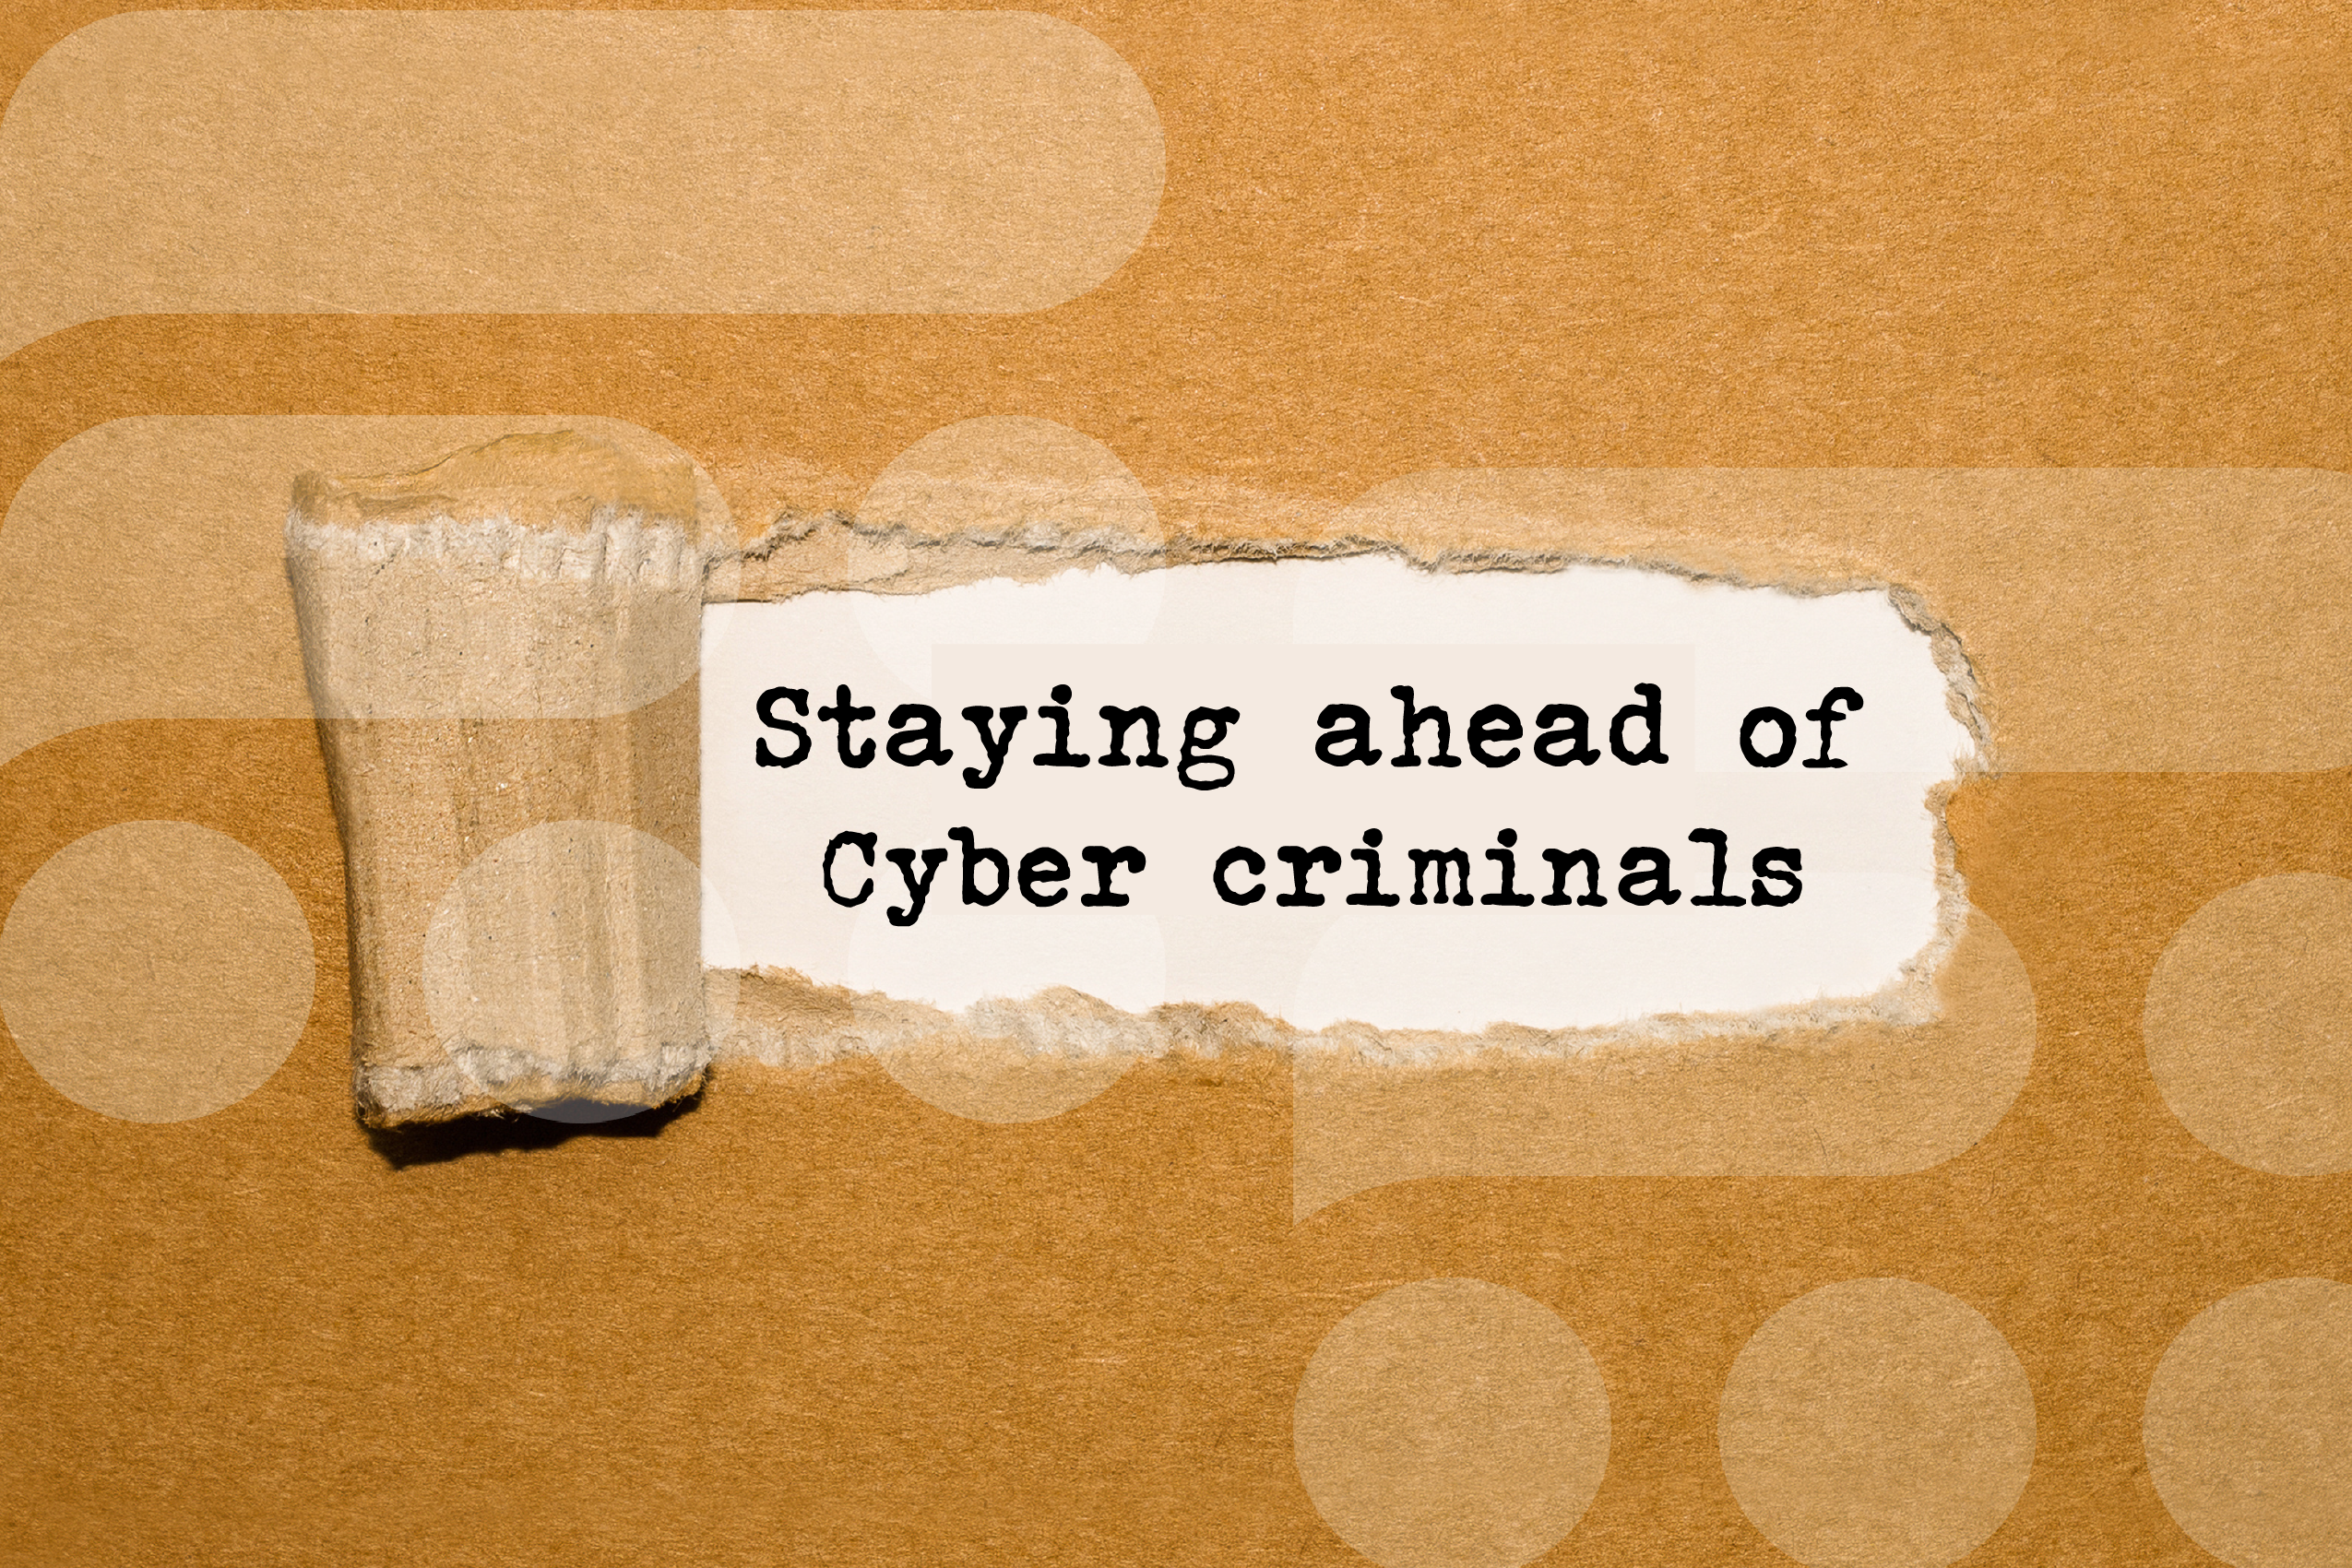 Staying ahead of Cyber criminals in an unpredictable digital world